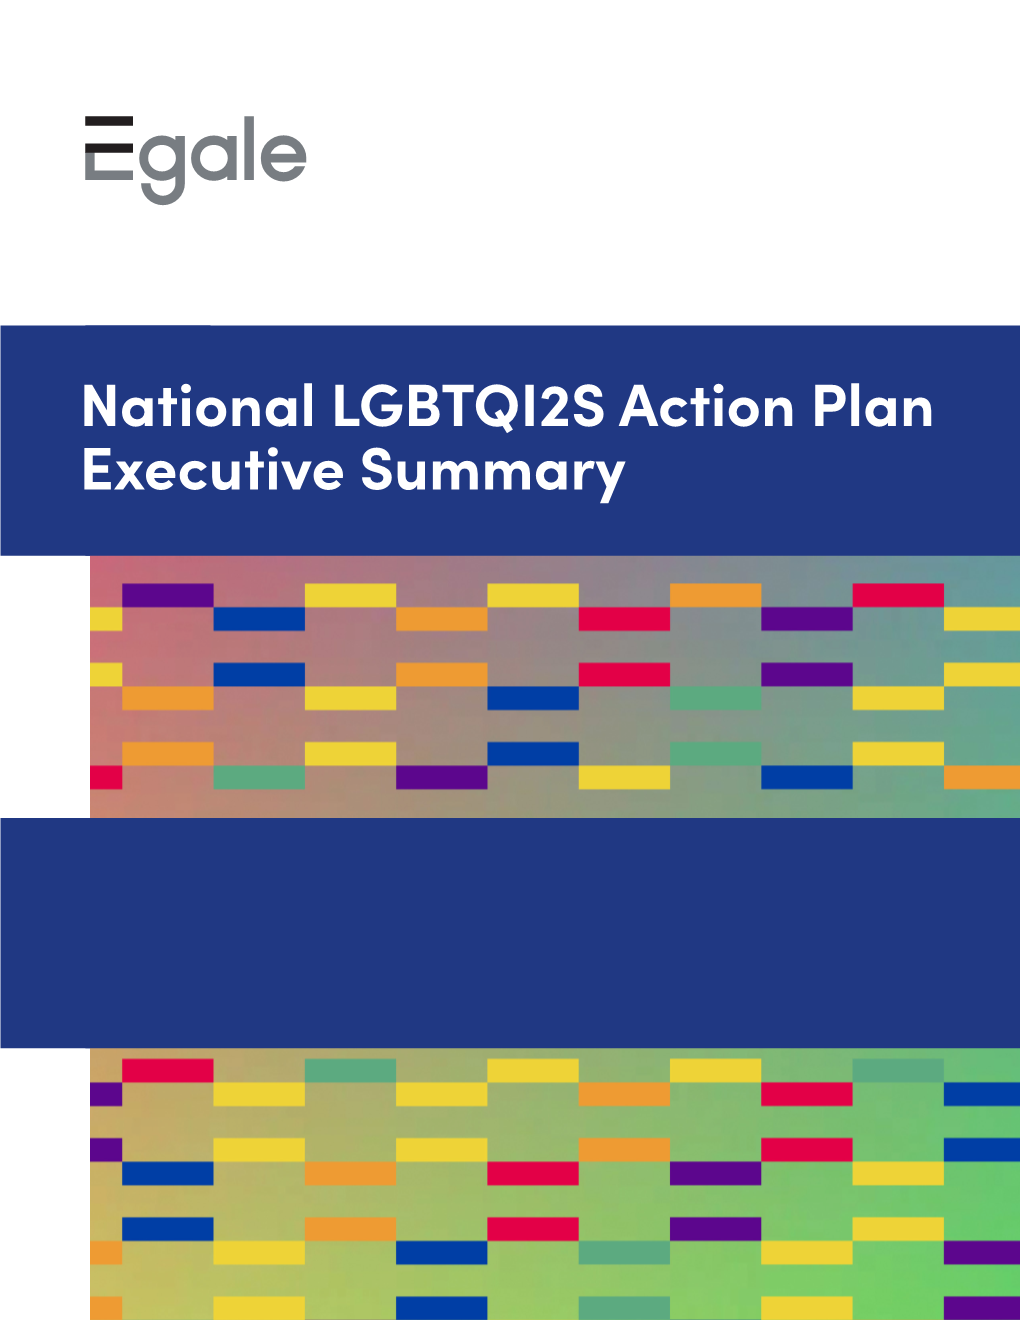 National LGBTQI2S Action Plan Executive Summary Founded in 1986, Egale Is Canada’S National LGBTQI2S Human Rights Organization